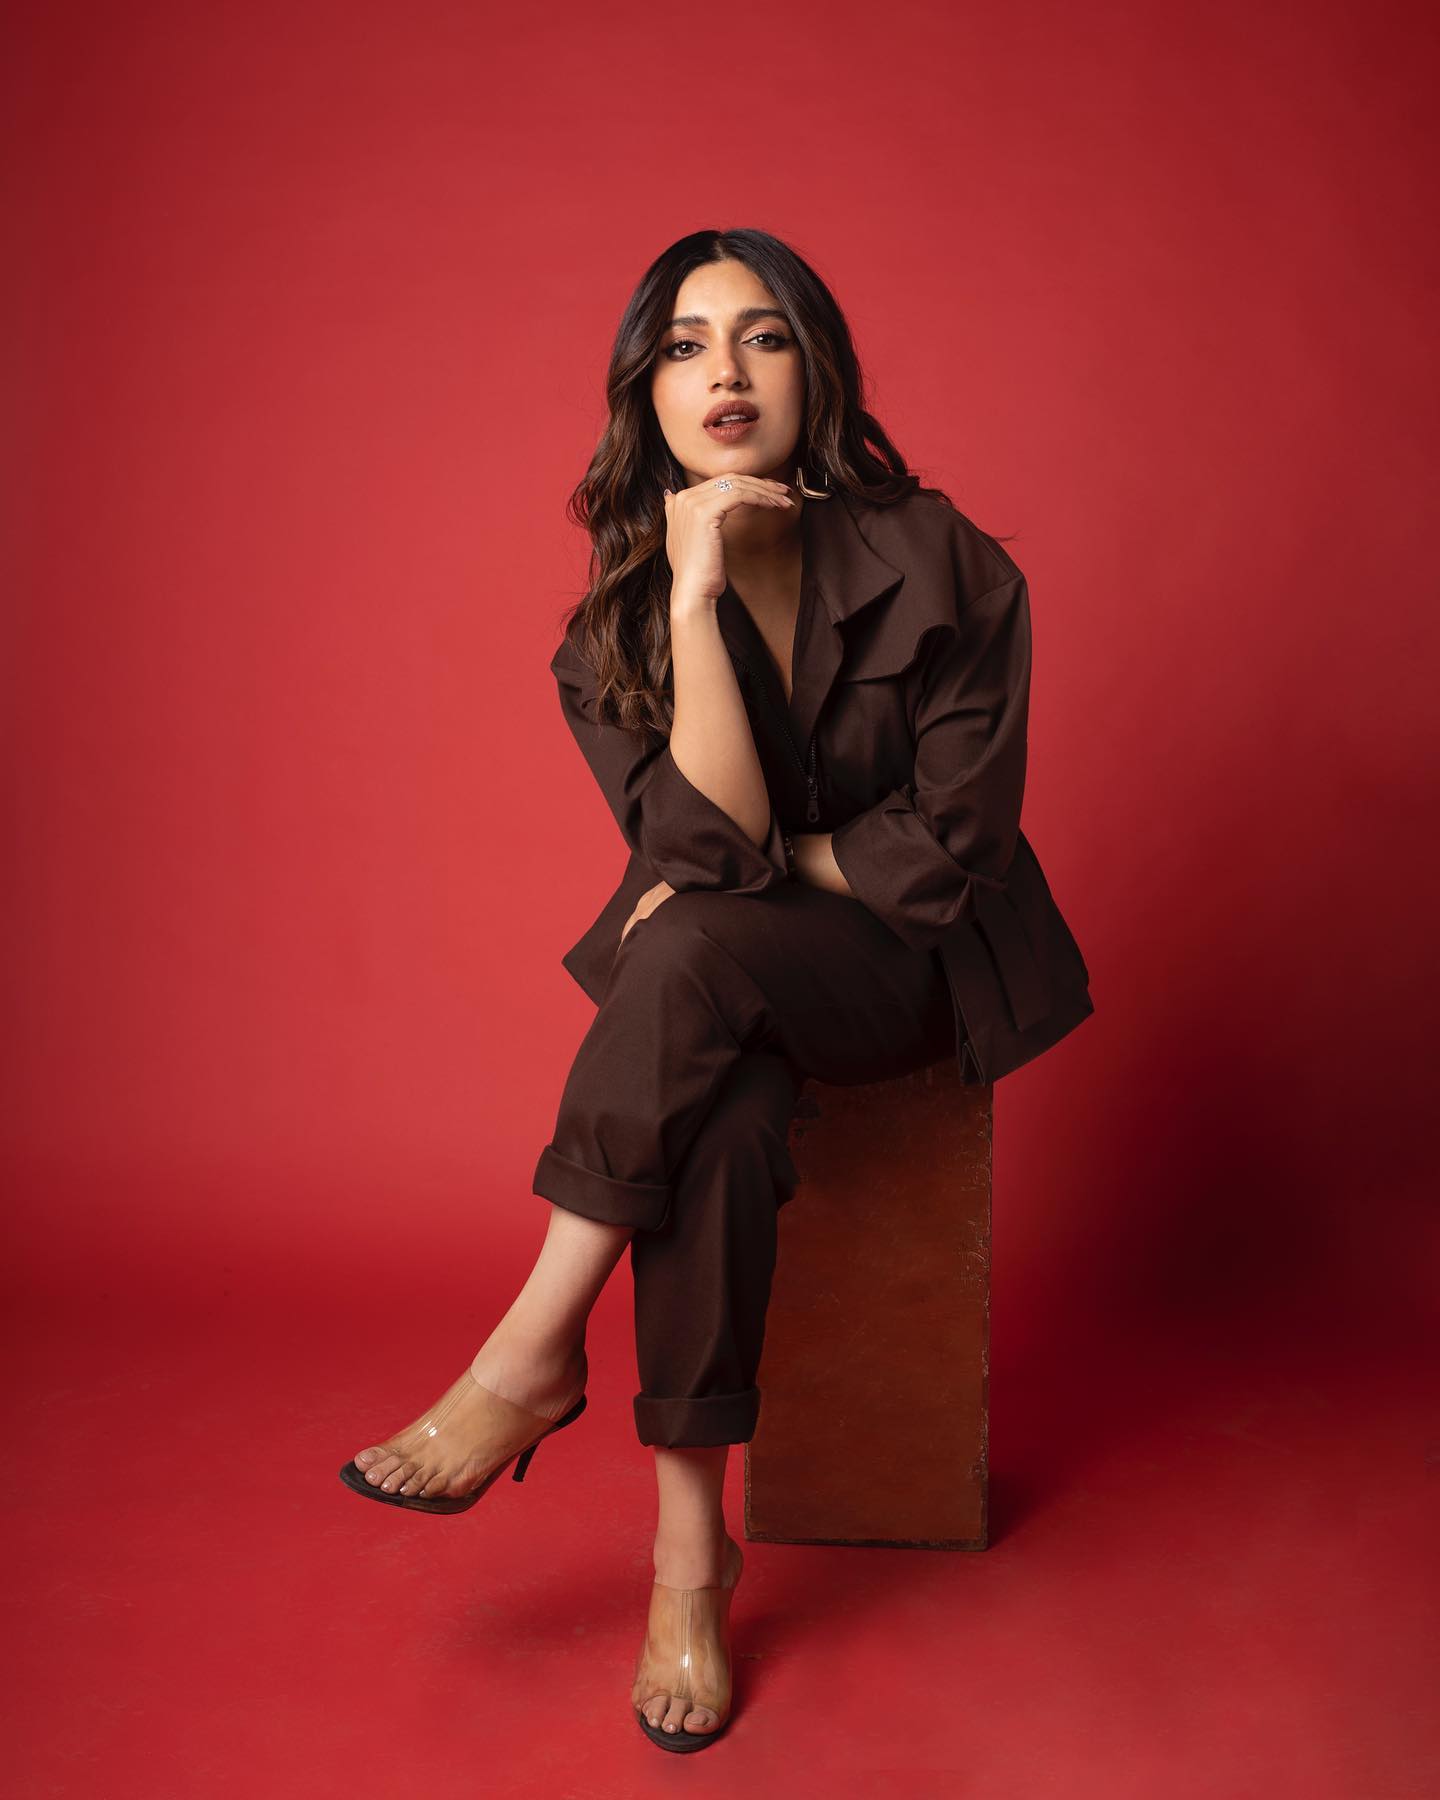 Exclusive! Bhumi Pednekar: 'It Feels Like The Pandemic Has Only Hit Producers When It Comes To Negotiating The Female Leads' Fee'